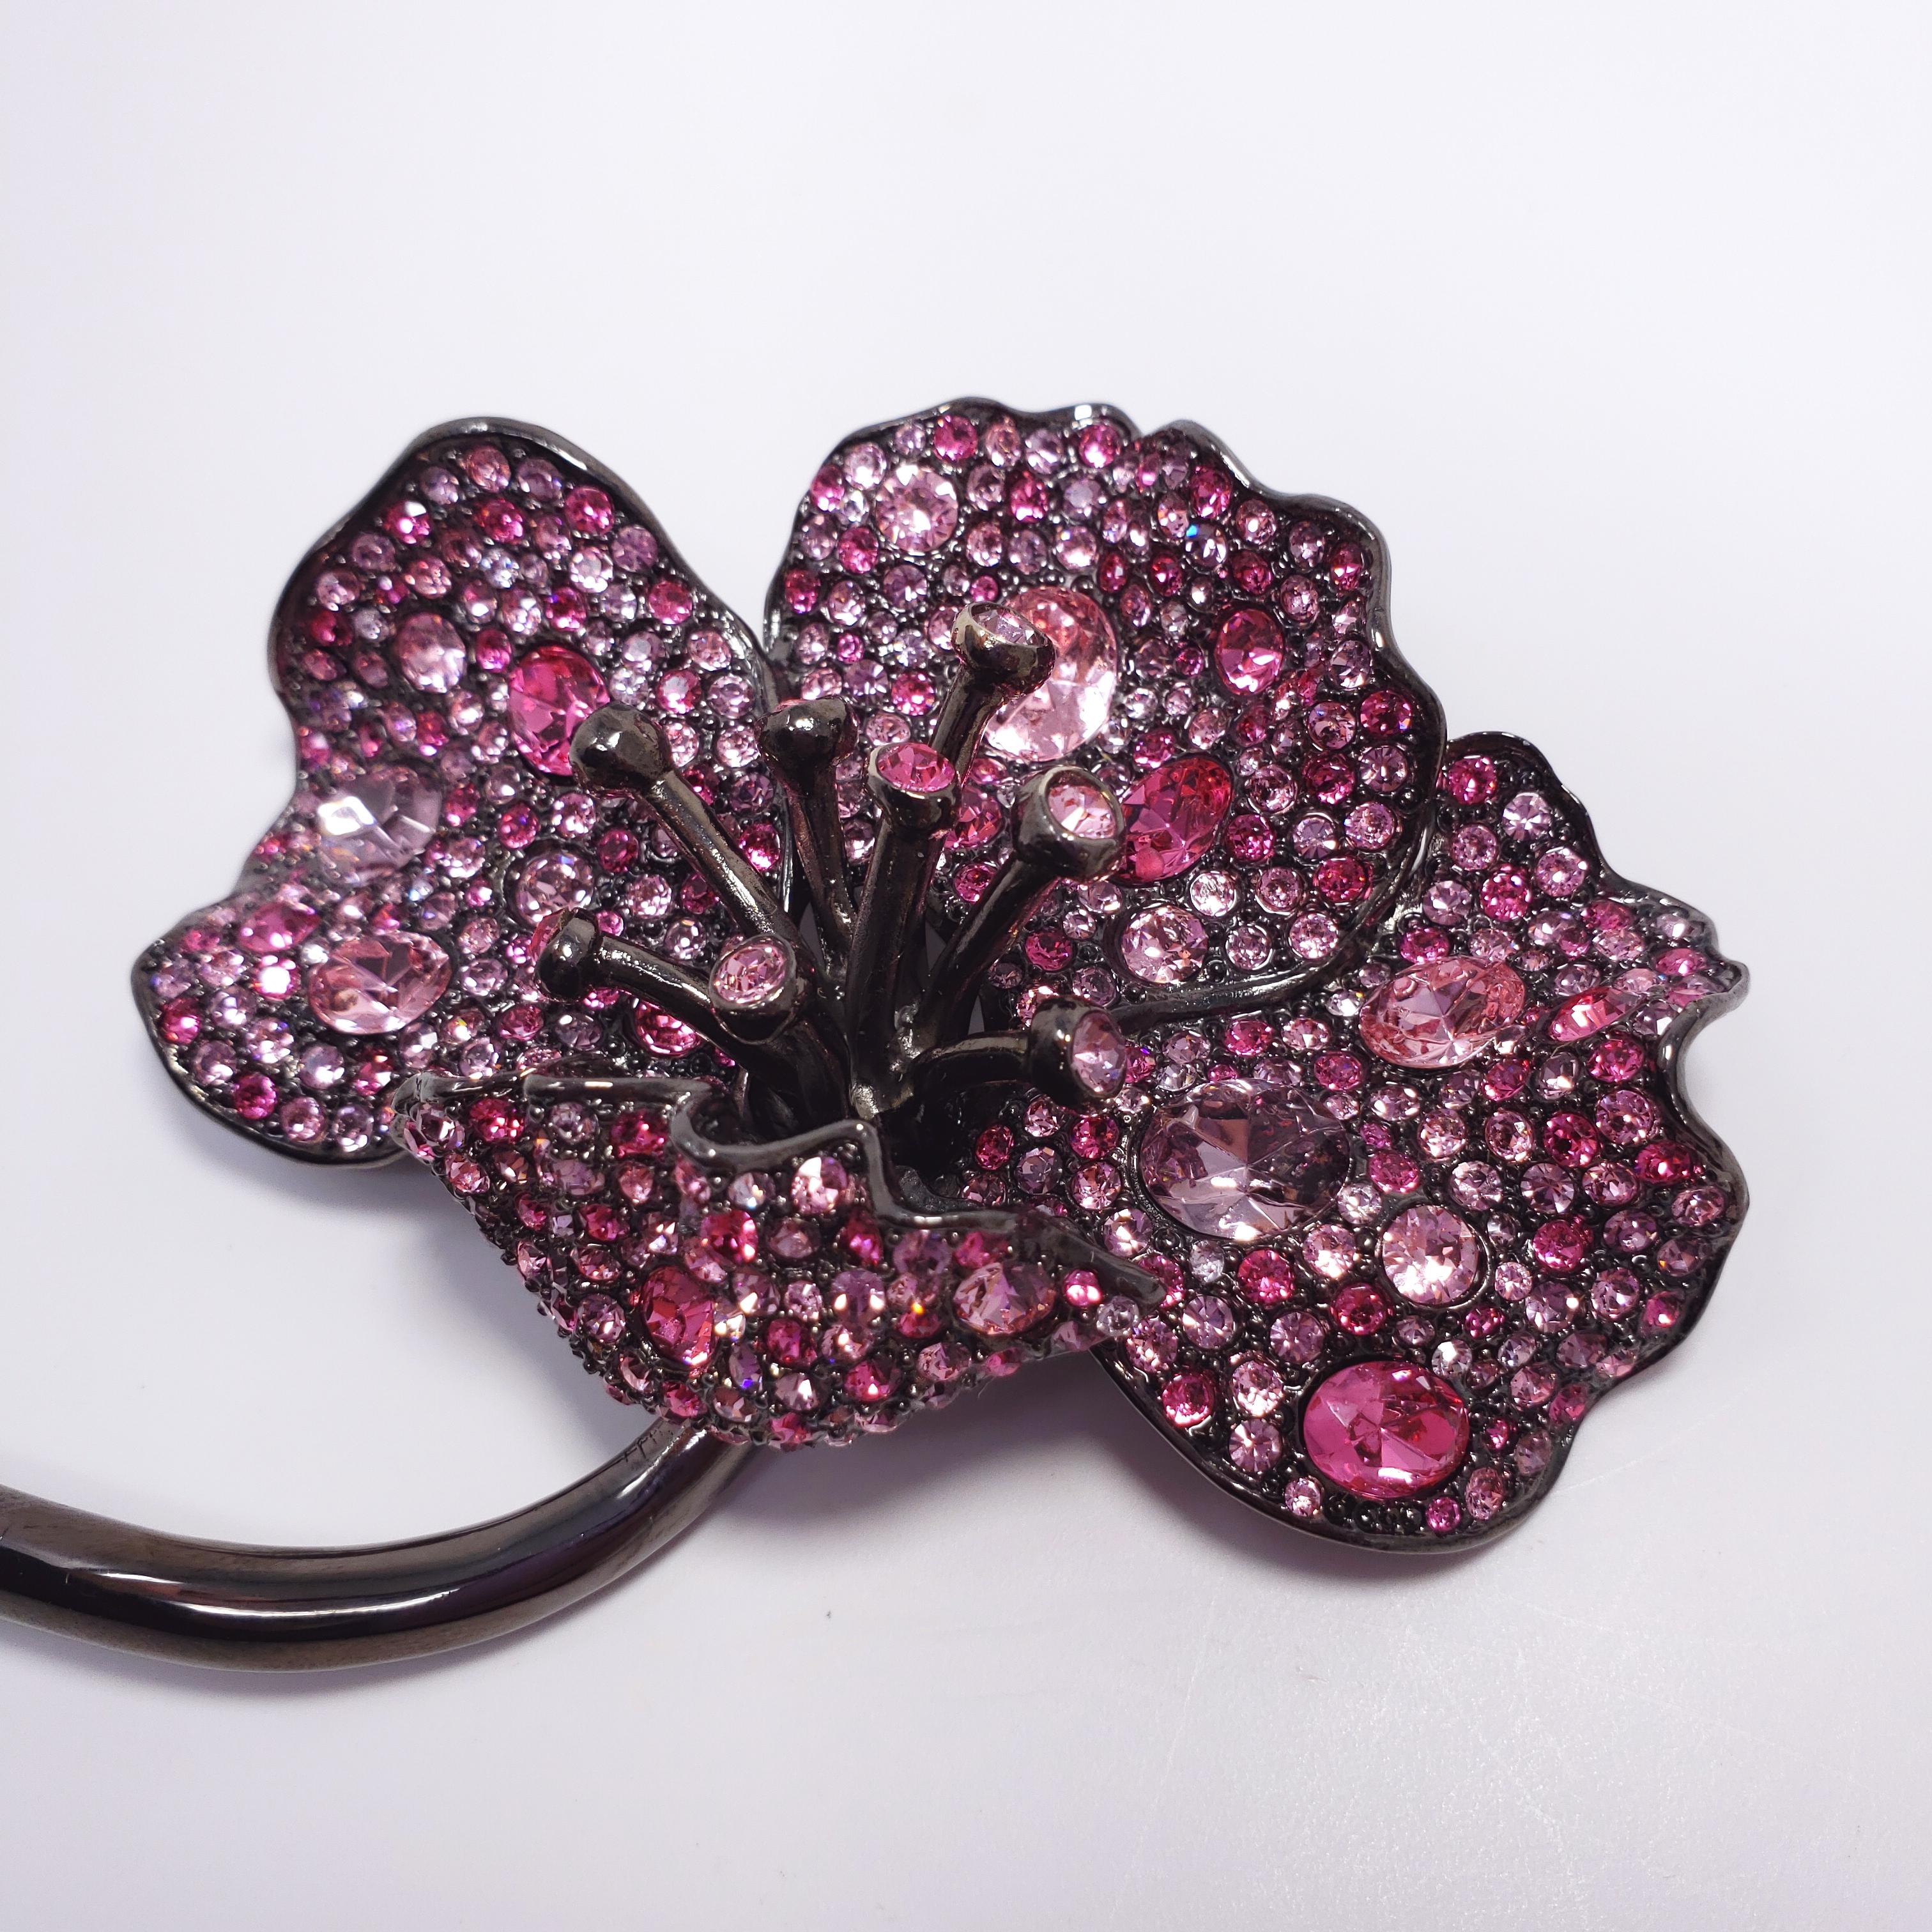 Pave jungle poppy brooch by Kenneth Jay Lane. Exotic rose colors! This dark gray gunmetal-tone flower is decorated with faceted amethyst colored crystals. 

...

Clasp: Pin stem with safety clasp

Metal Type: Dark gray gunmetal tone

Tags, Marks,